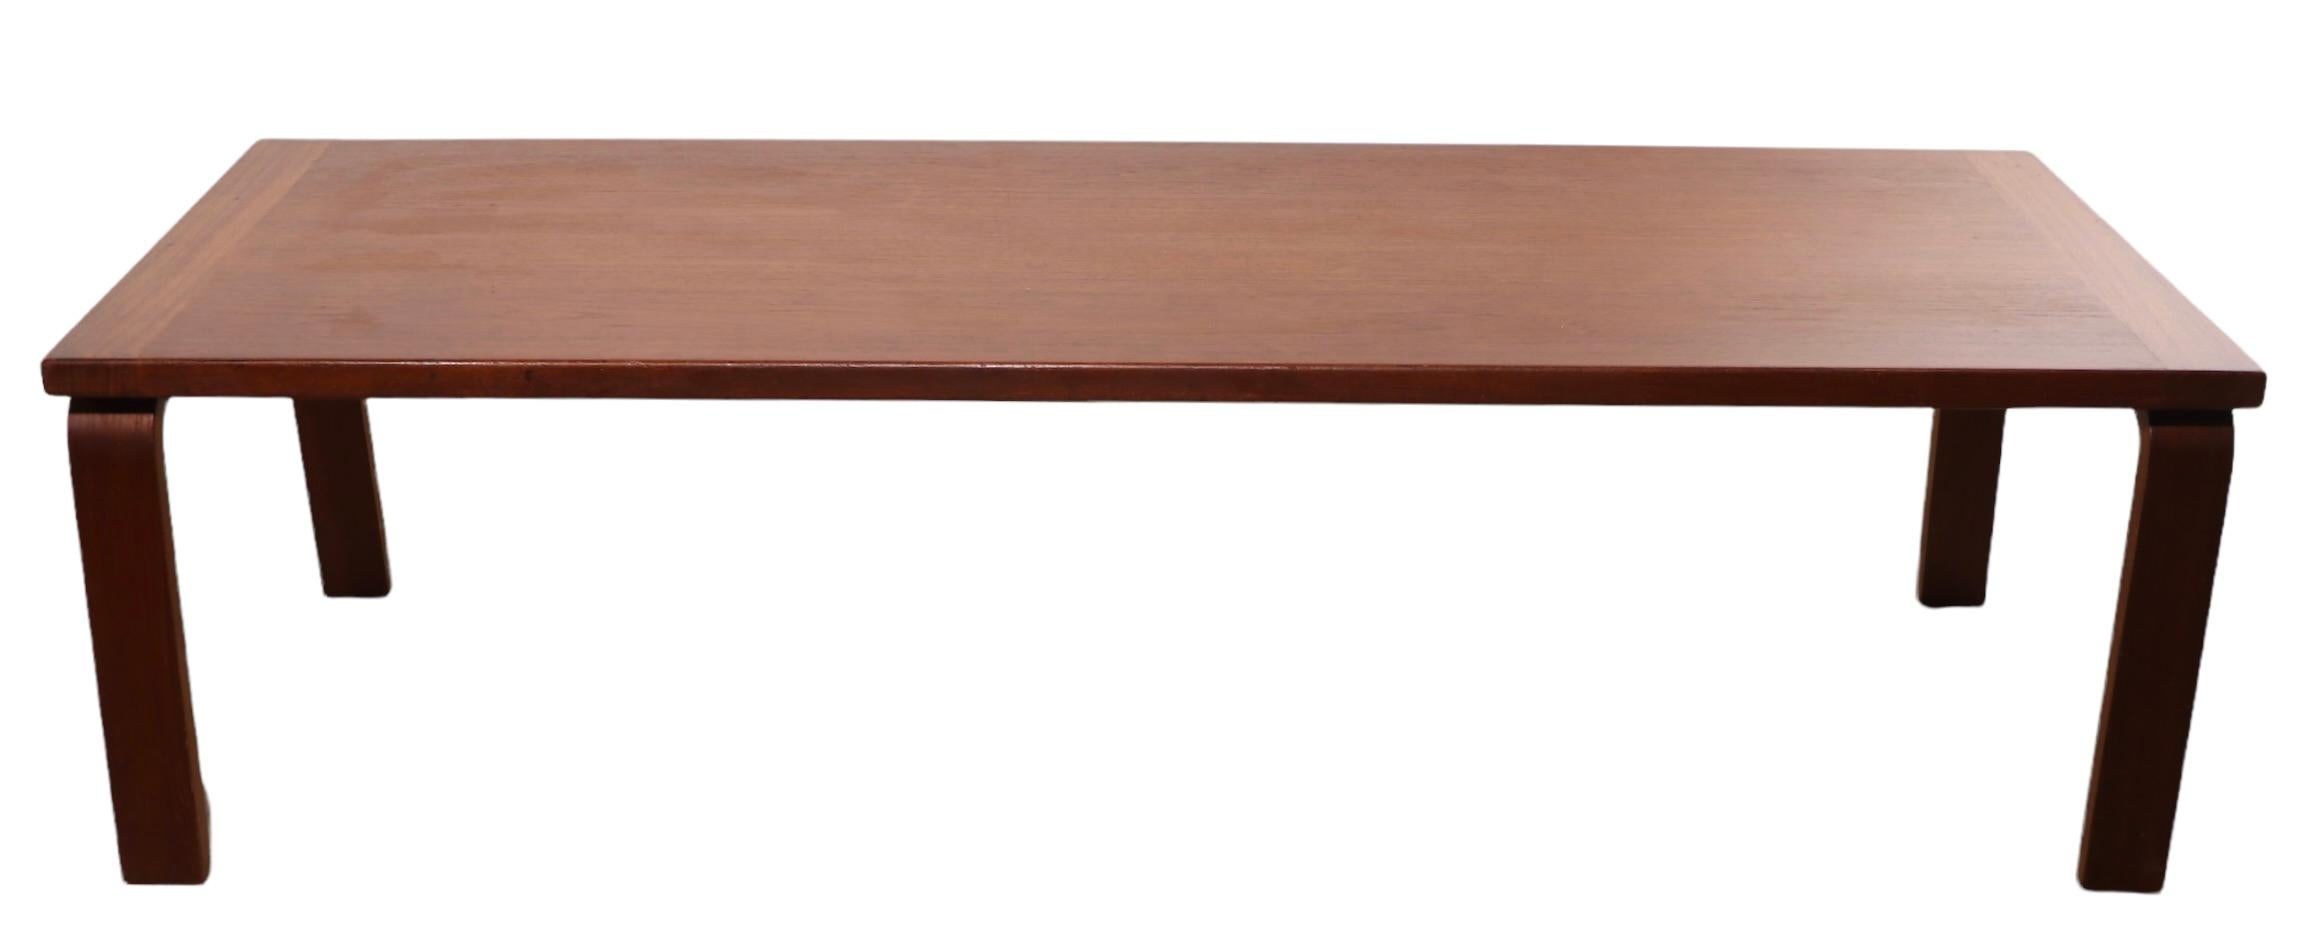 Mid Century Teak Coffee Table by Westnofa Made in Norway, C 1960/1970s For Sale 1